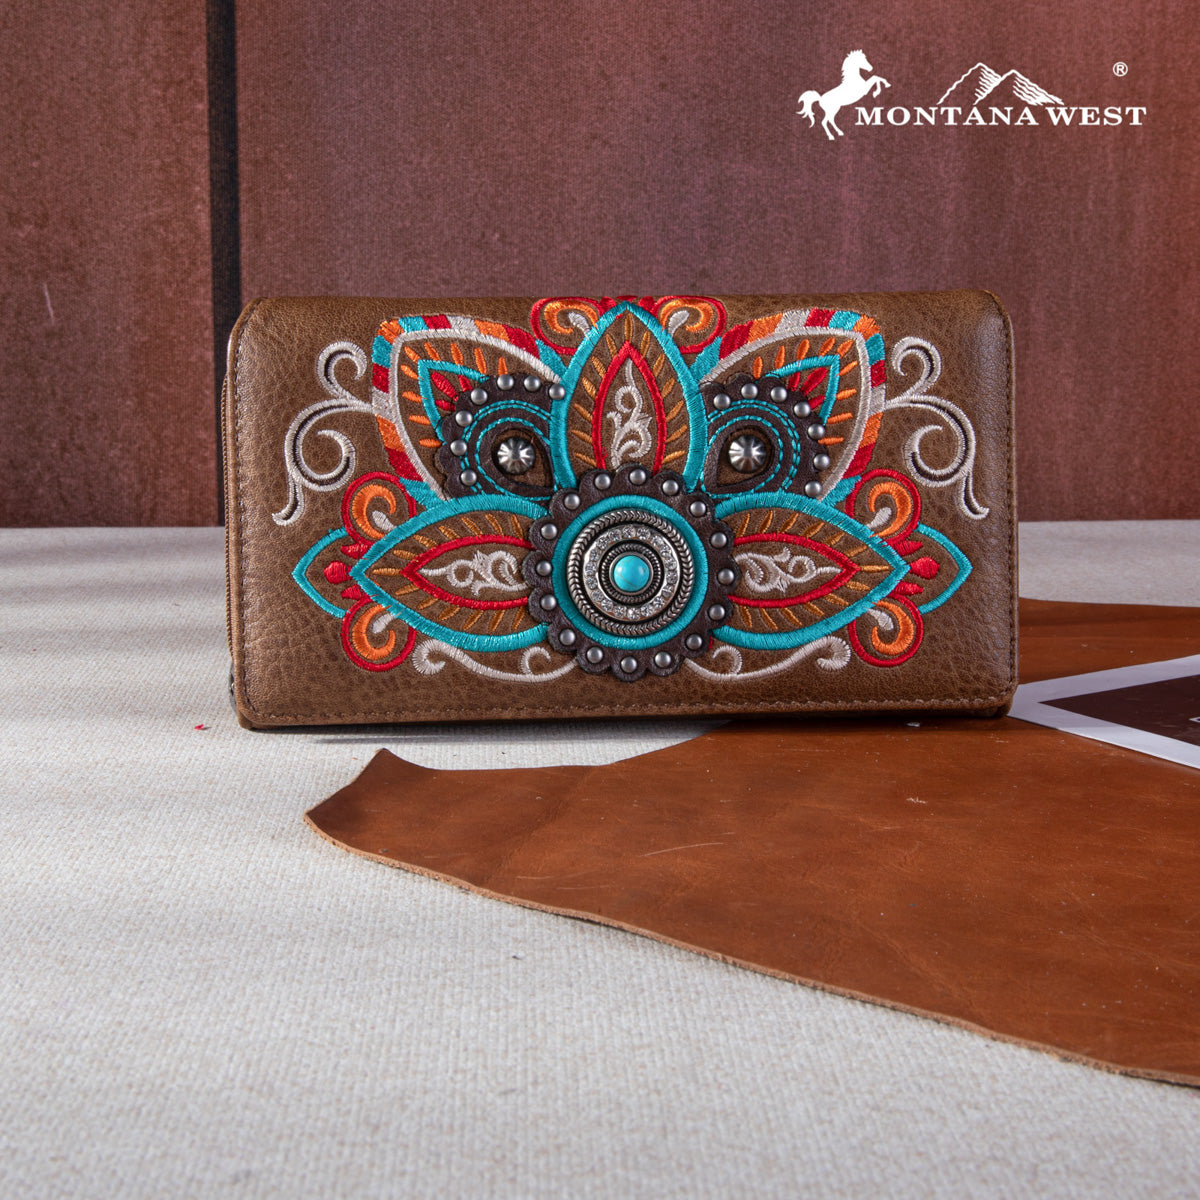 Montana West Concho Studs Wallet